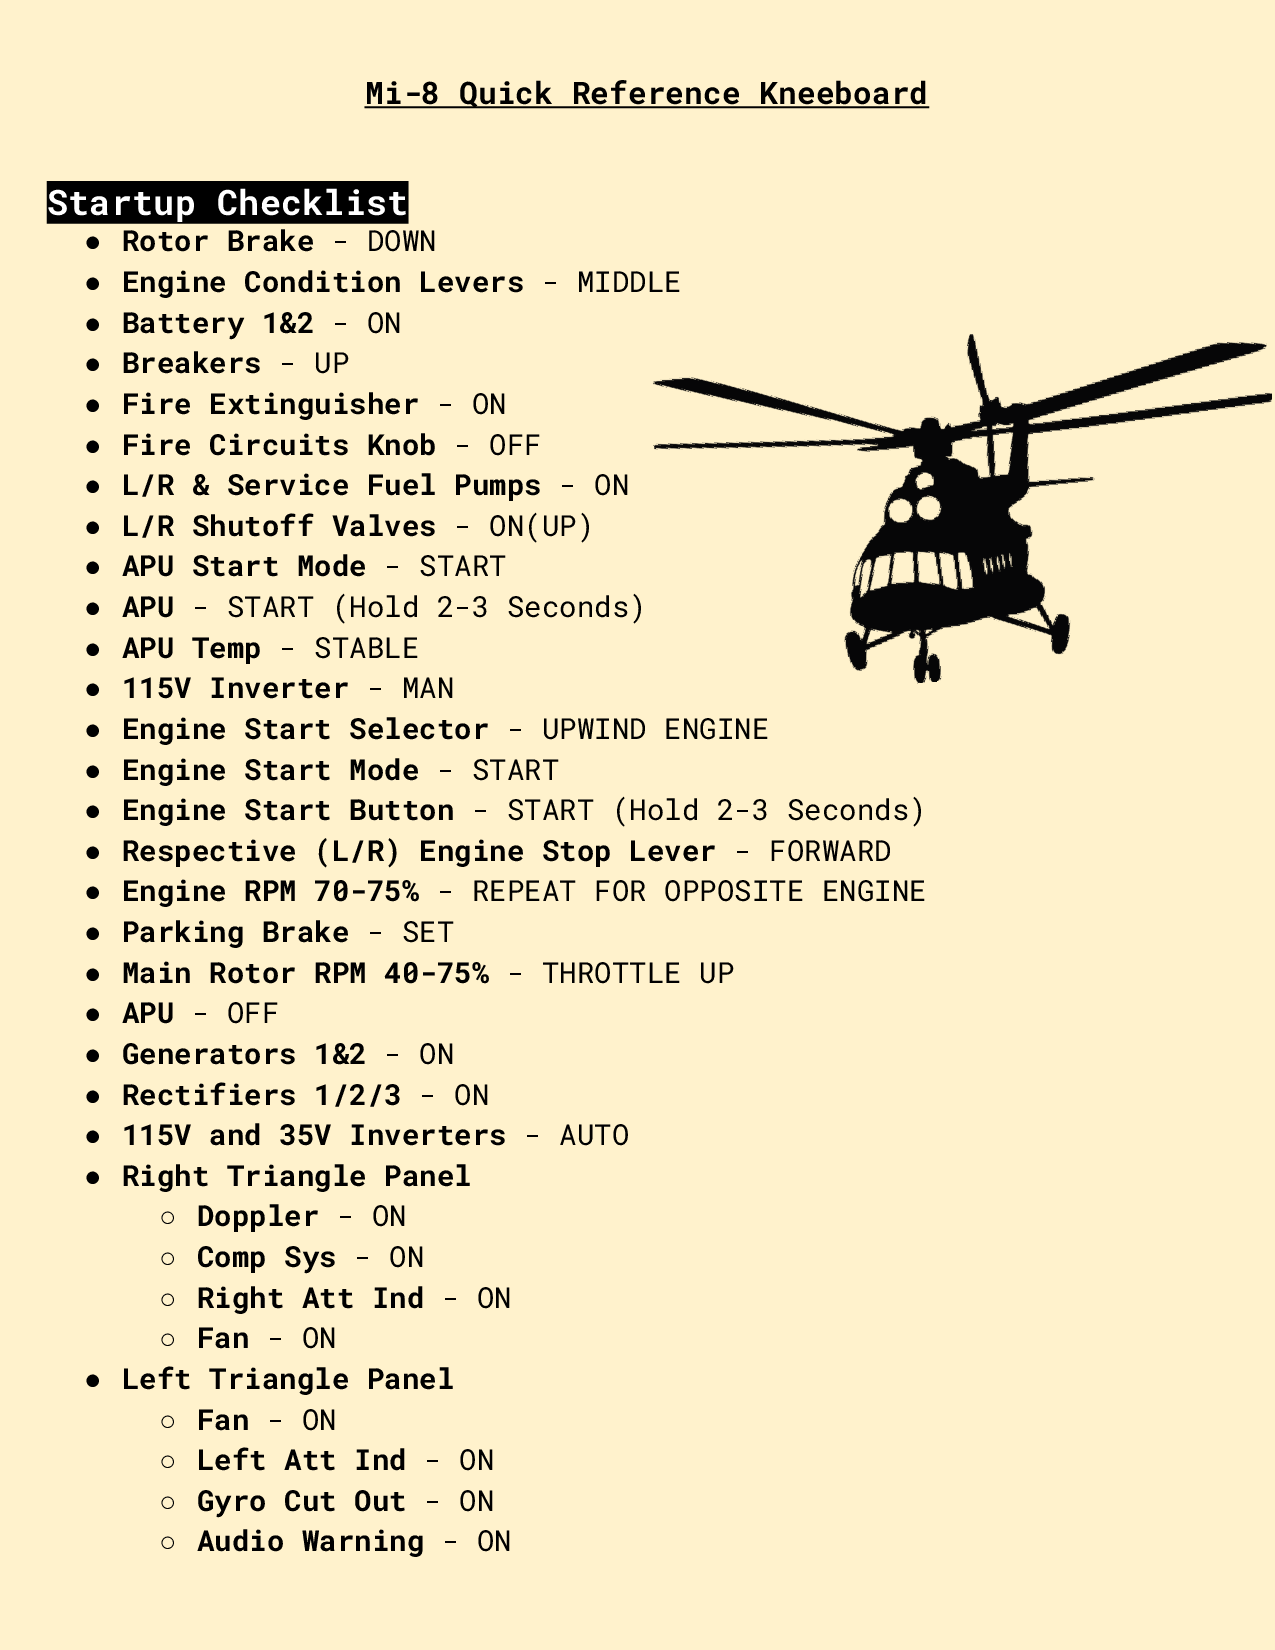 Mi-8 Hip Quick Reference Kneeboard and Checklists By: Hayden